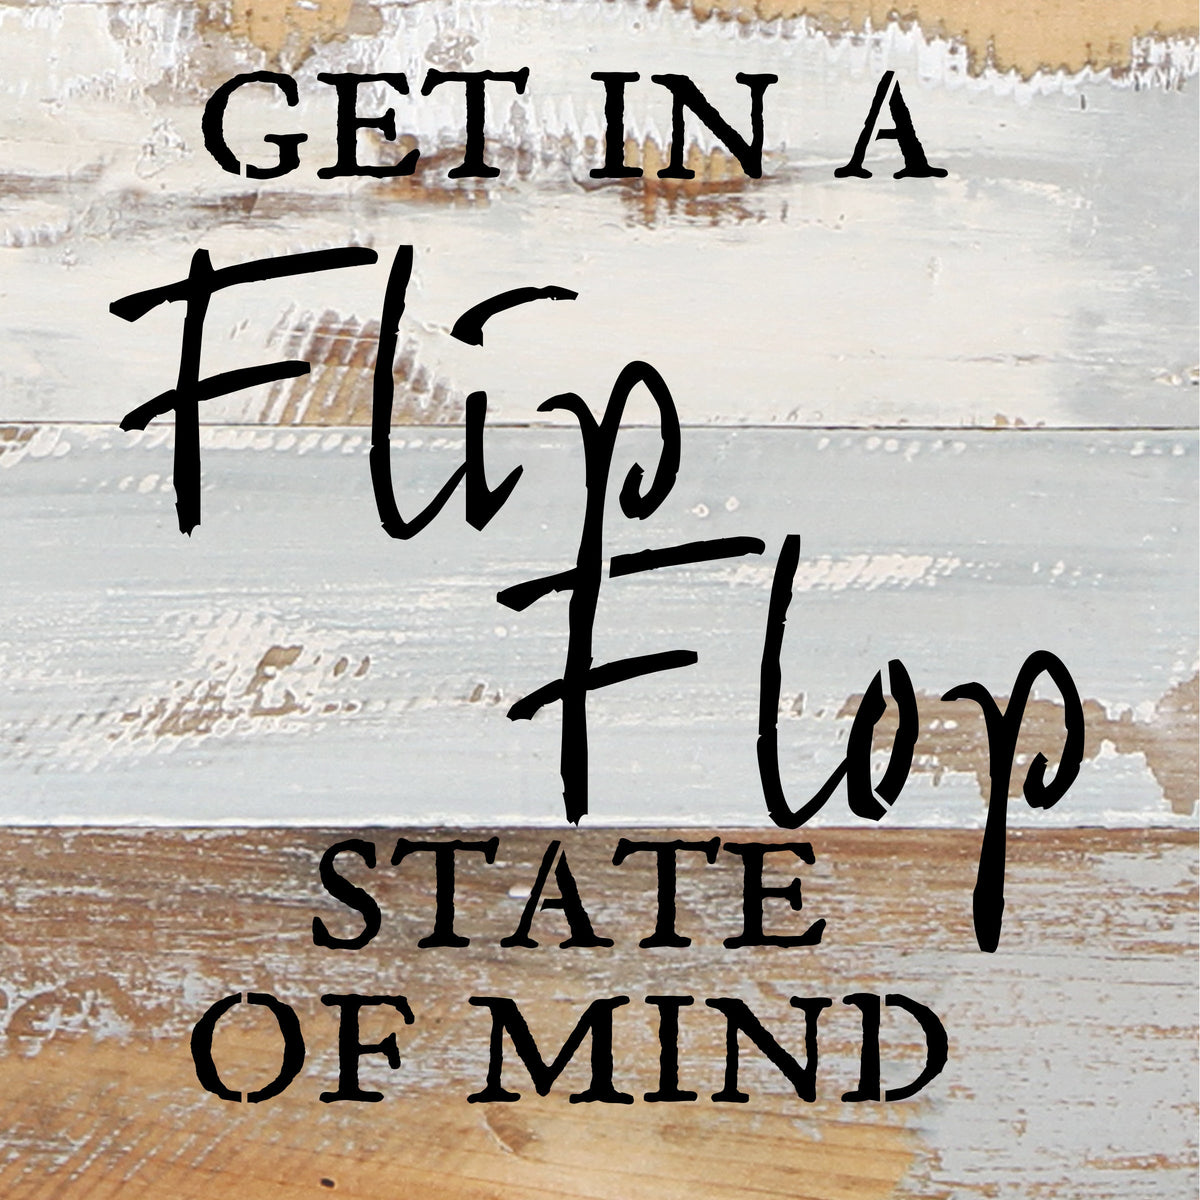 Get in a flip flop state of mind / 8x8 Reclaimed Wood Wall Art